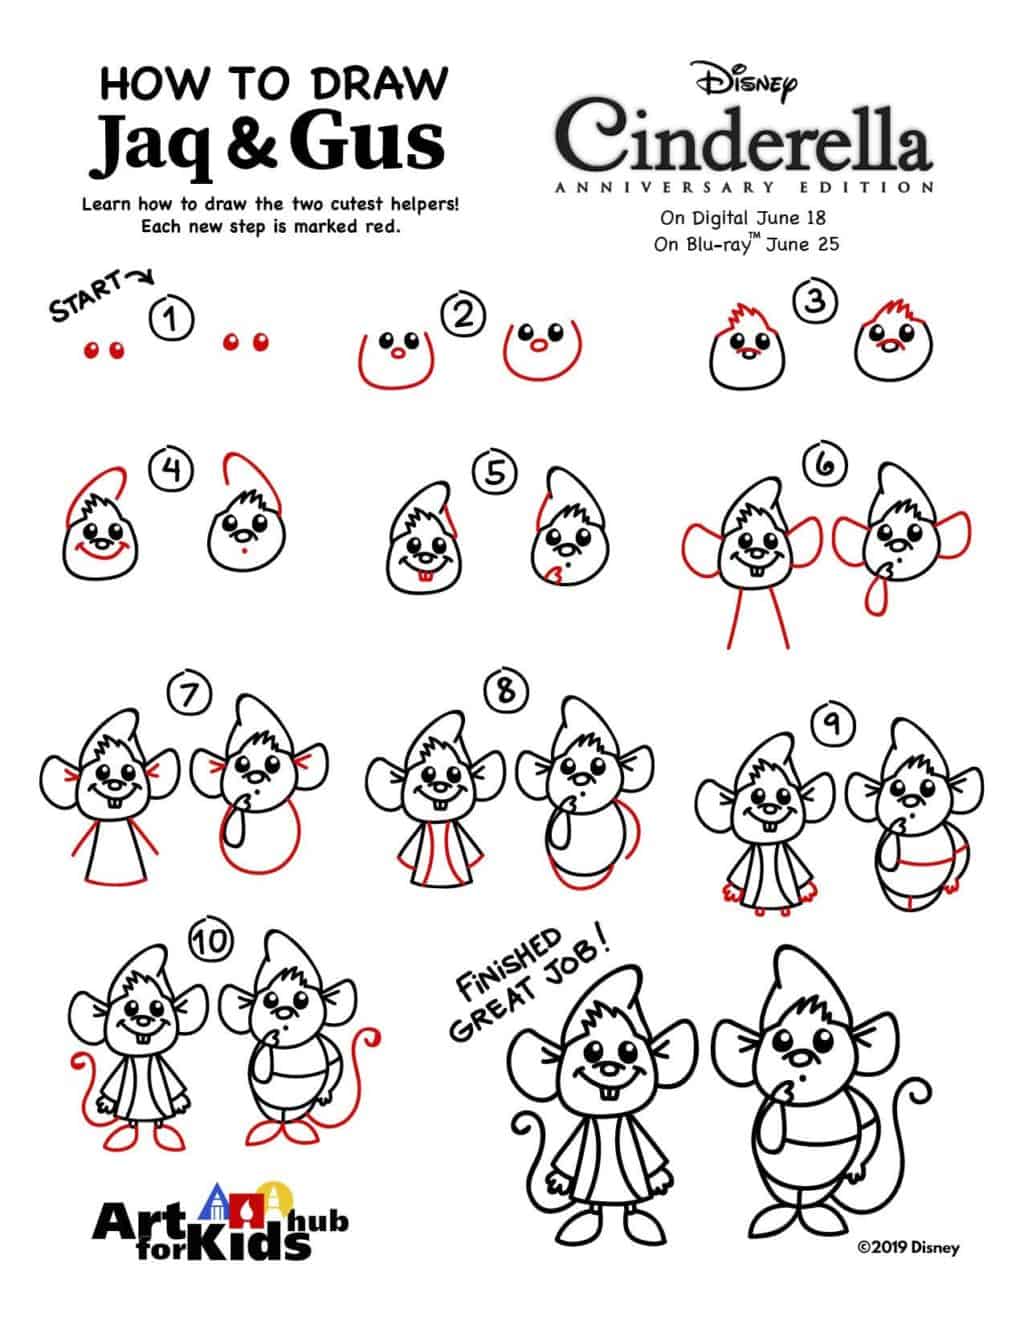 Learn how to draw Jaq and Gus from Cinderella